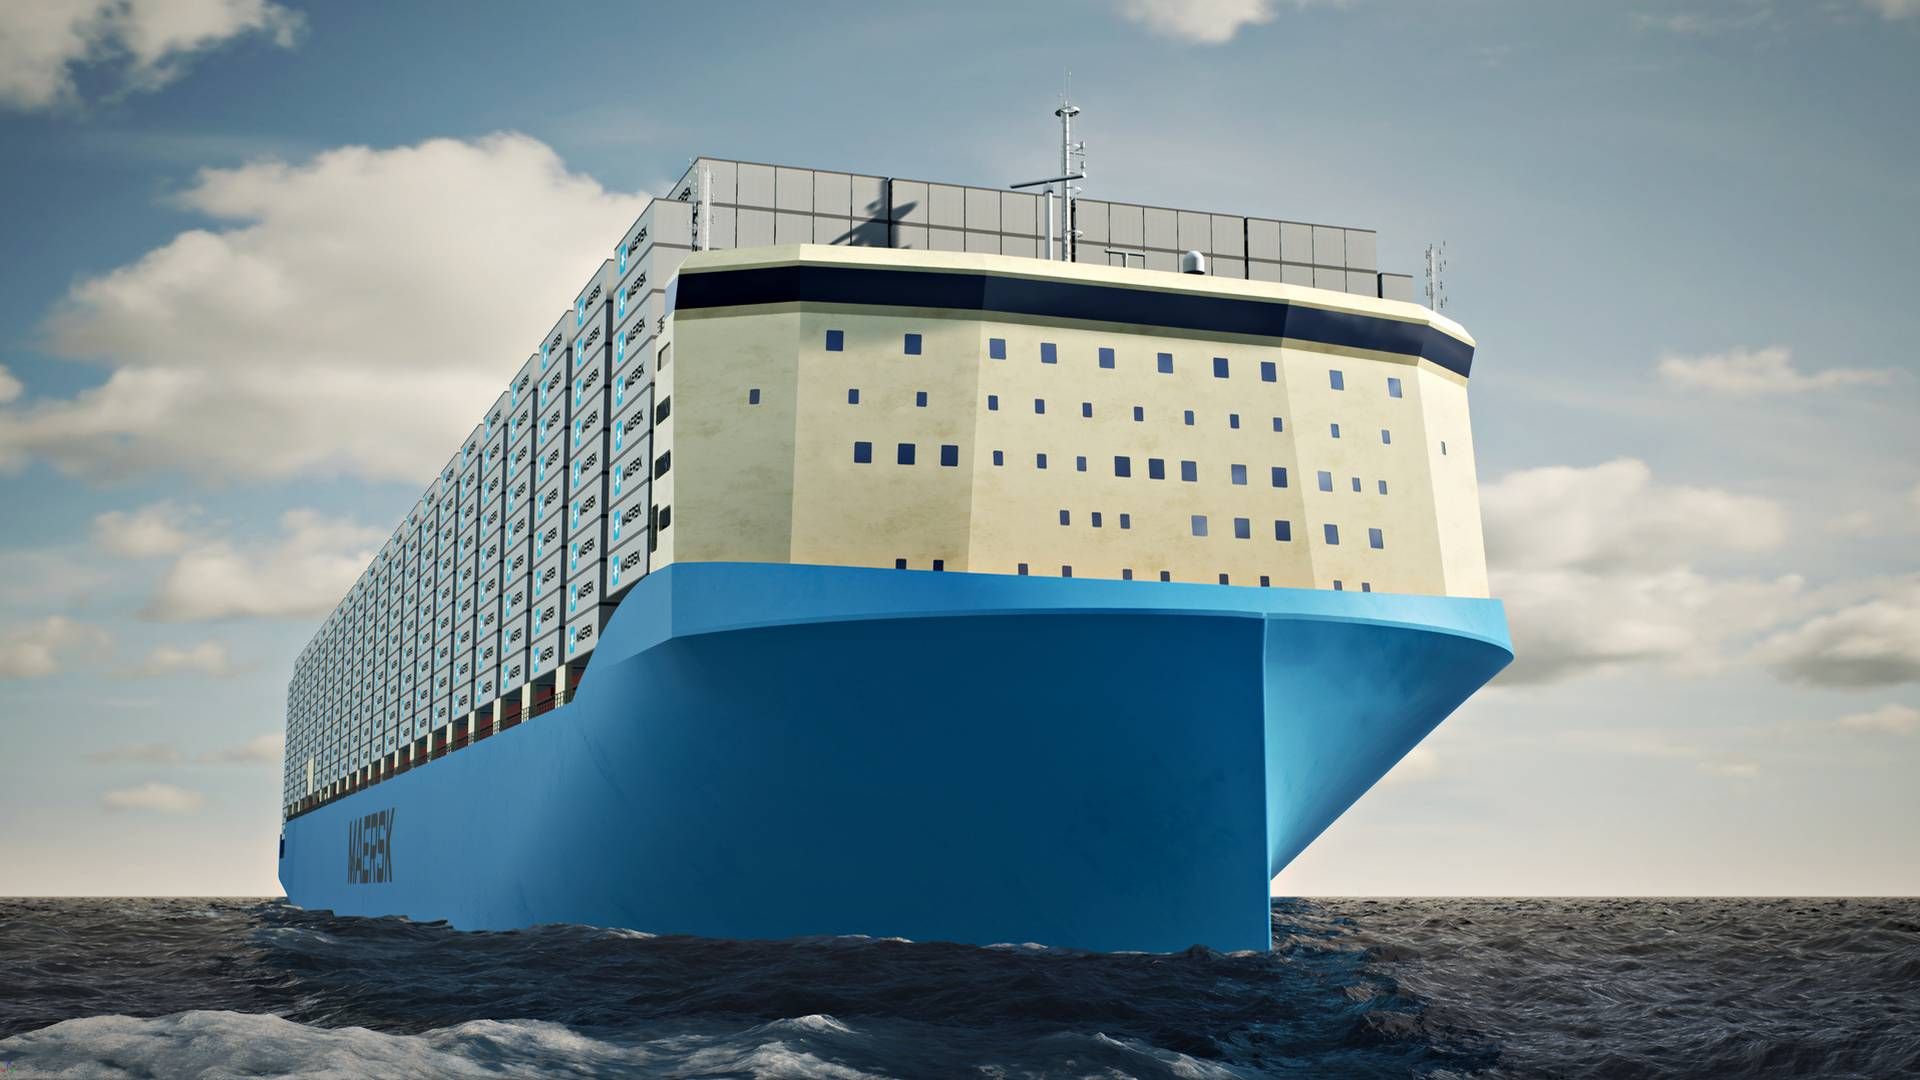 Internally, Maersk is calling its new ship design the greatest innovation since the carrier launched its Triple E vessels with a capacity of 18,000 teu in 2013. | Photo: Maersk